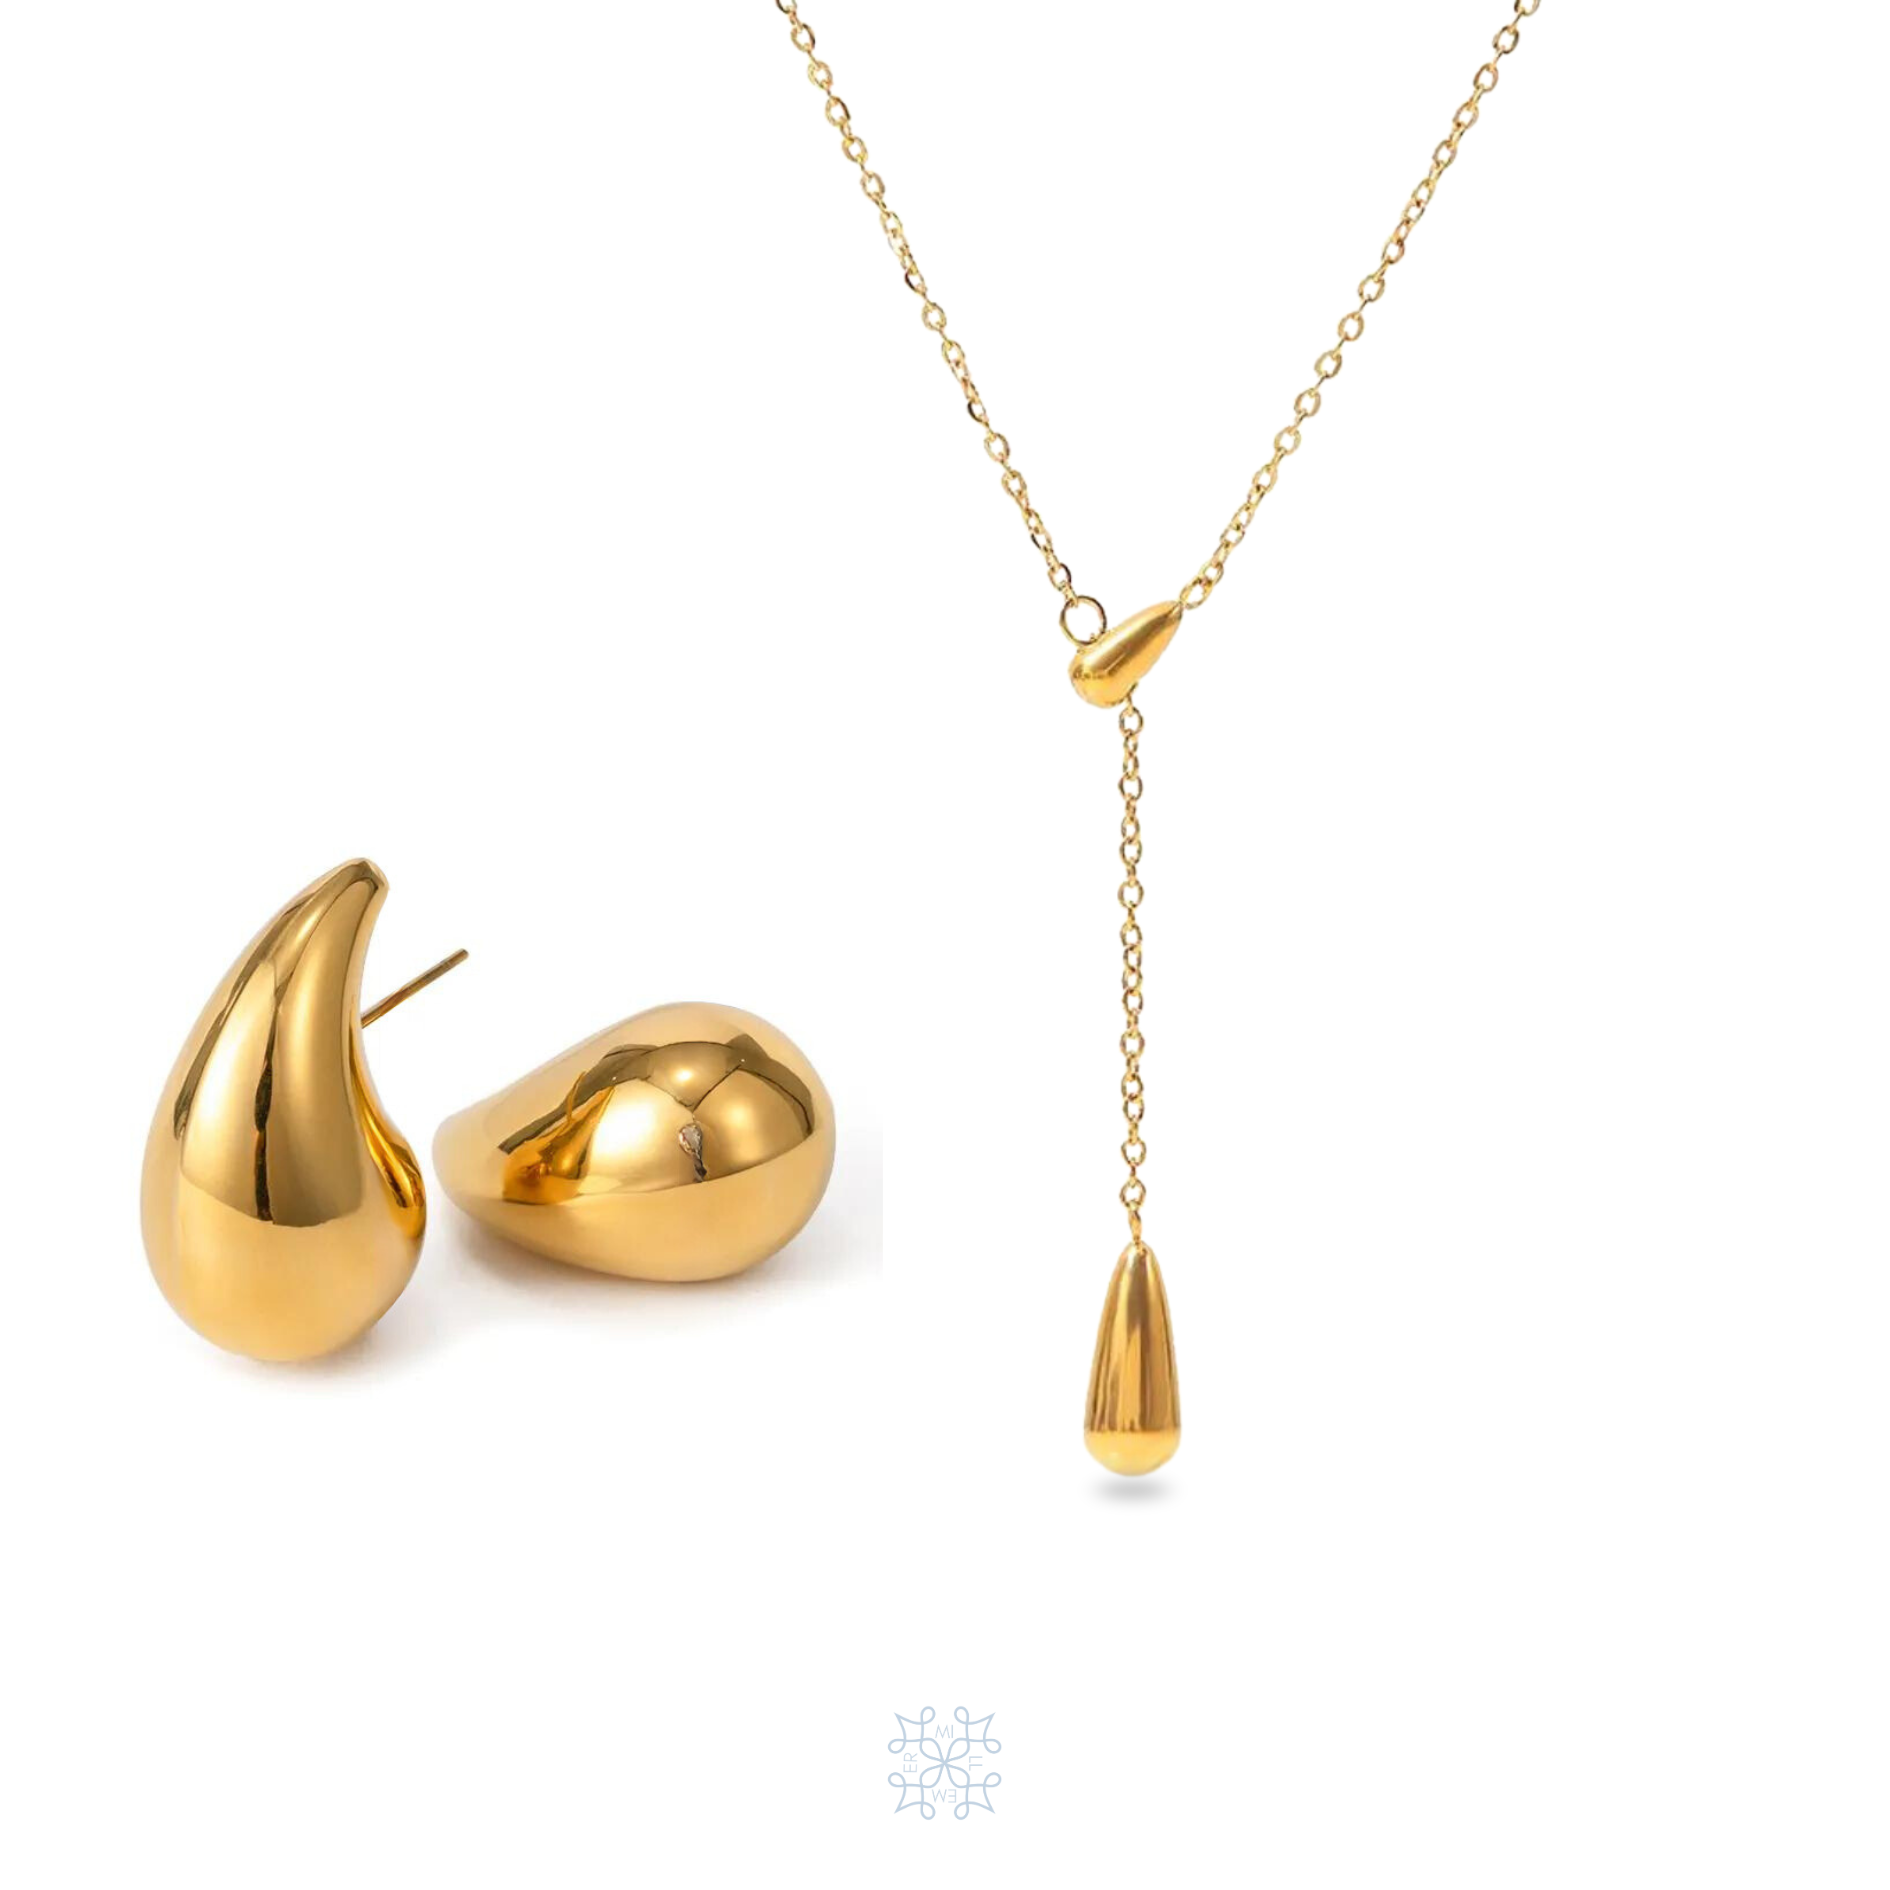 Jewelry set, Gold waterdrop earrings. Gold chain necklace with a gold waterdrop pendant.